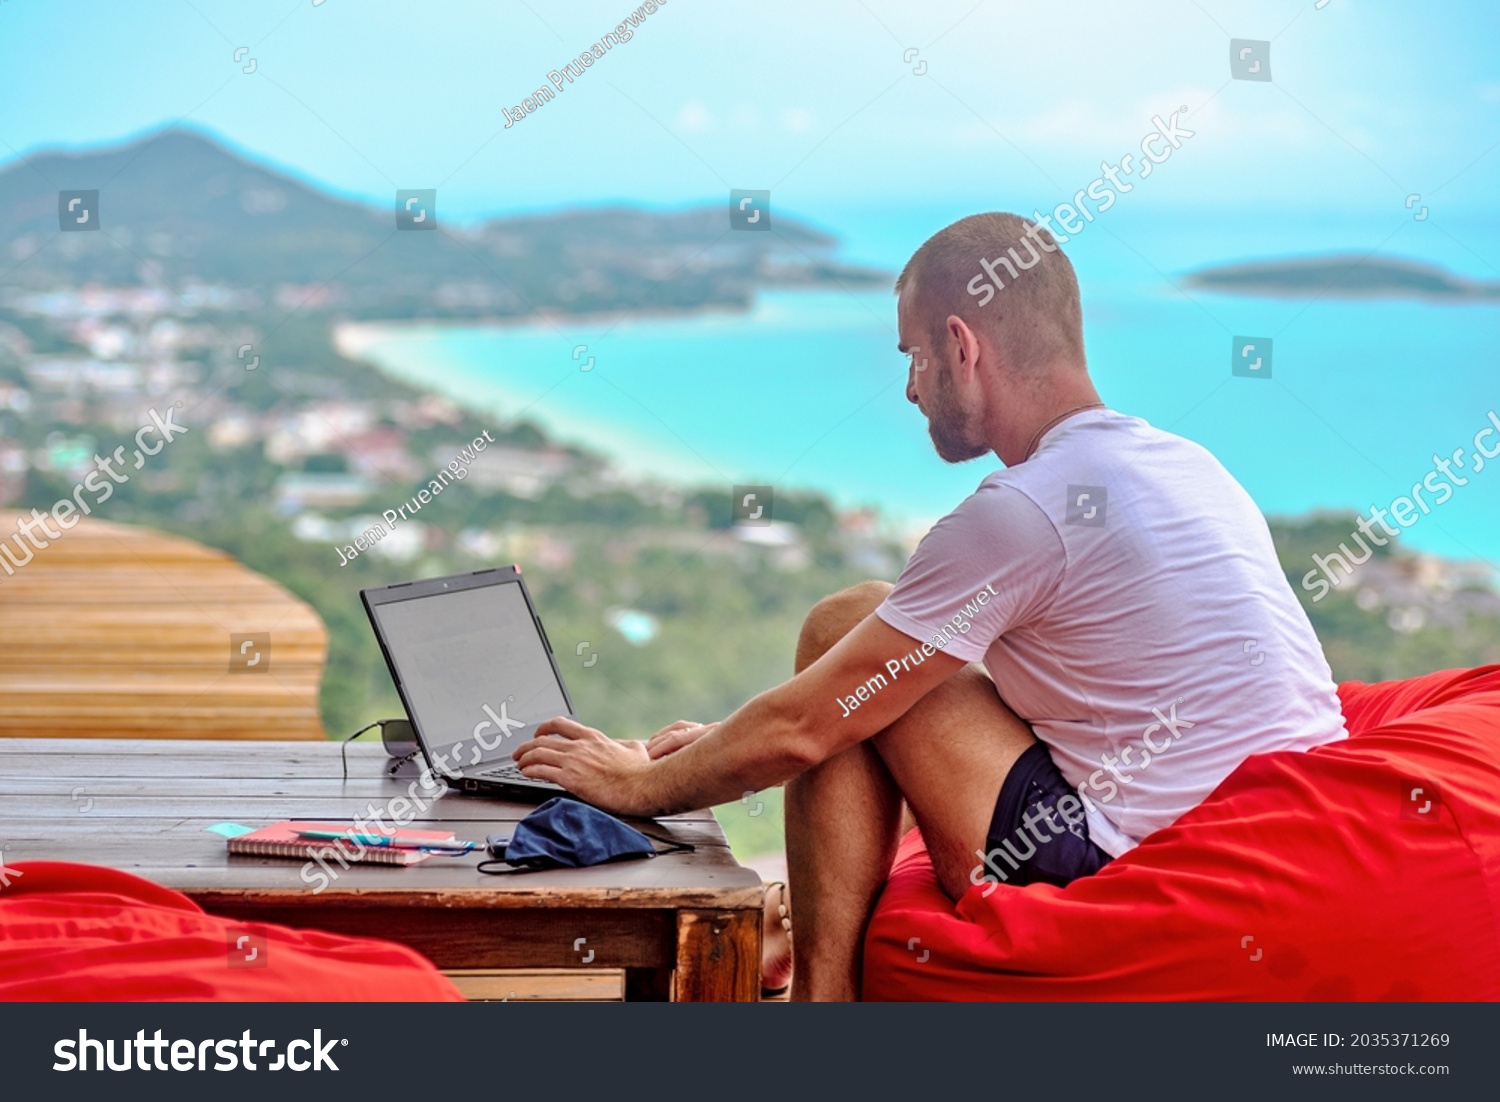 A Caucasian man sitting on a red cushion working remotely with his laptop. There are mountains and the sea in the background #2035371269